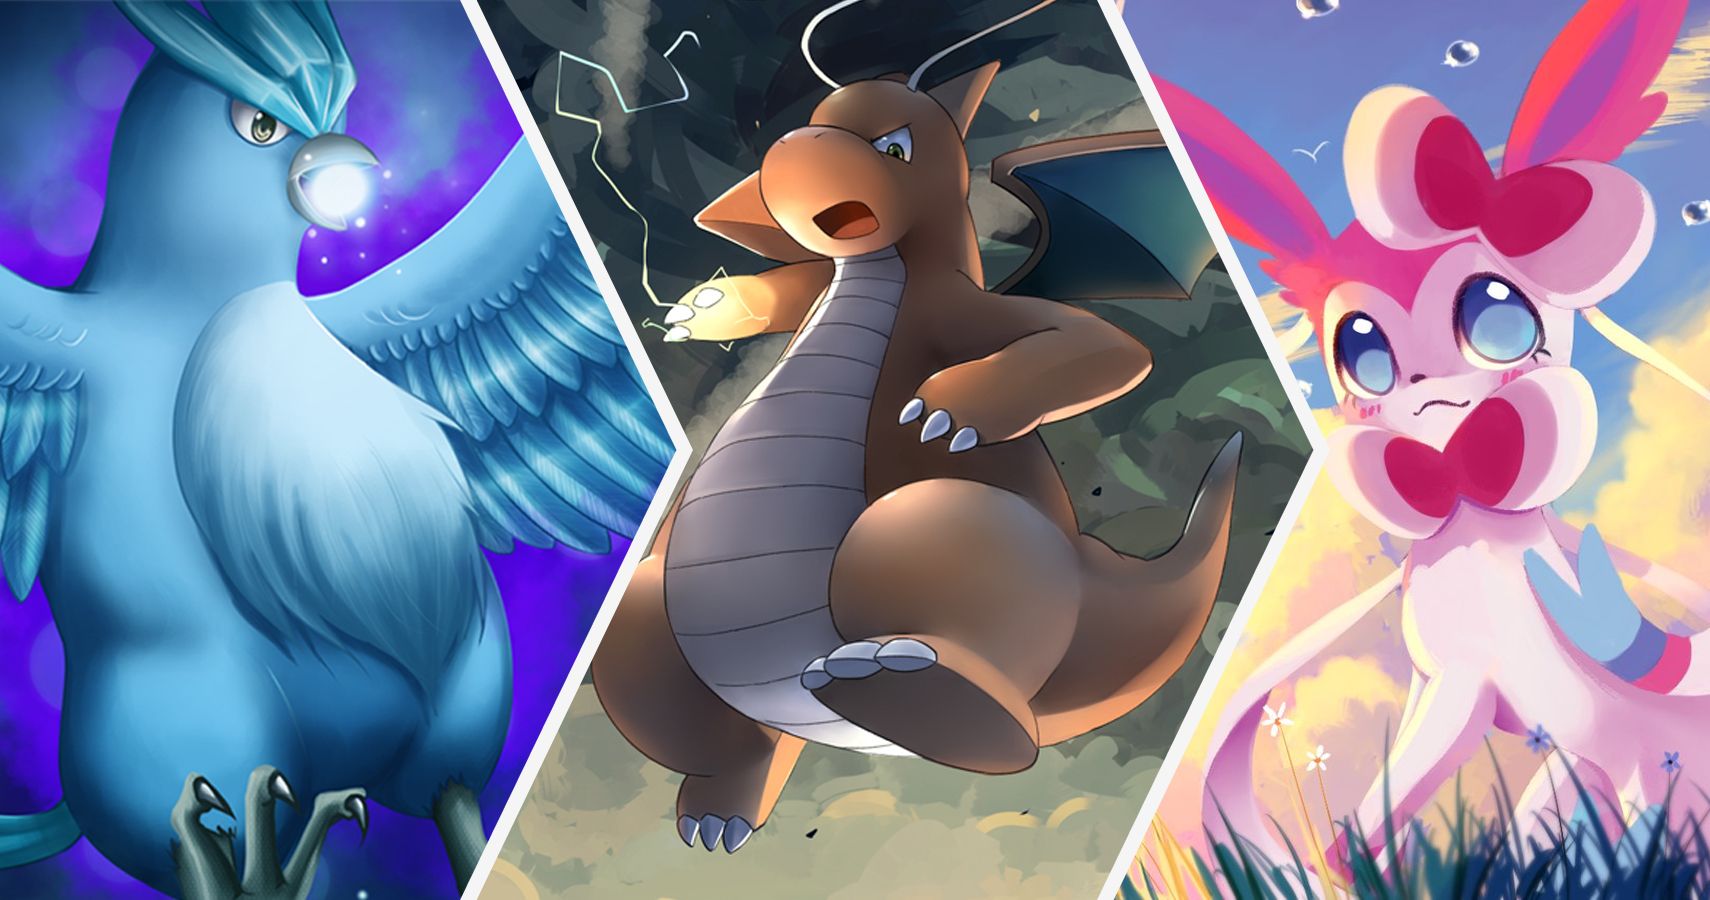 15 Pokemon That Are Completely Op And 10 No One Should Use